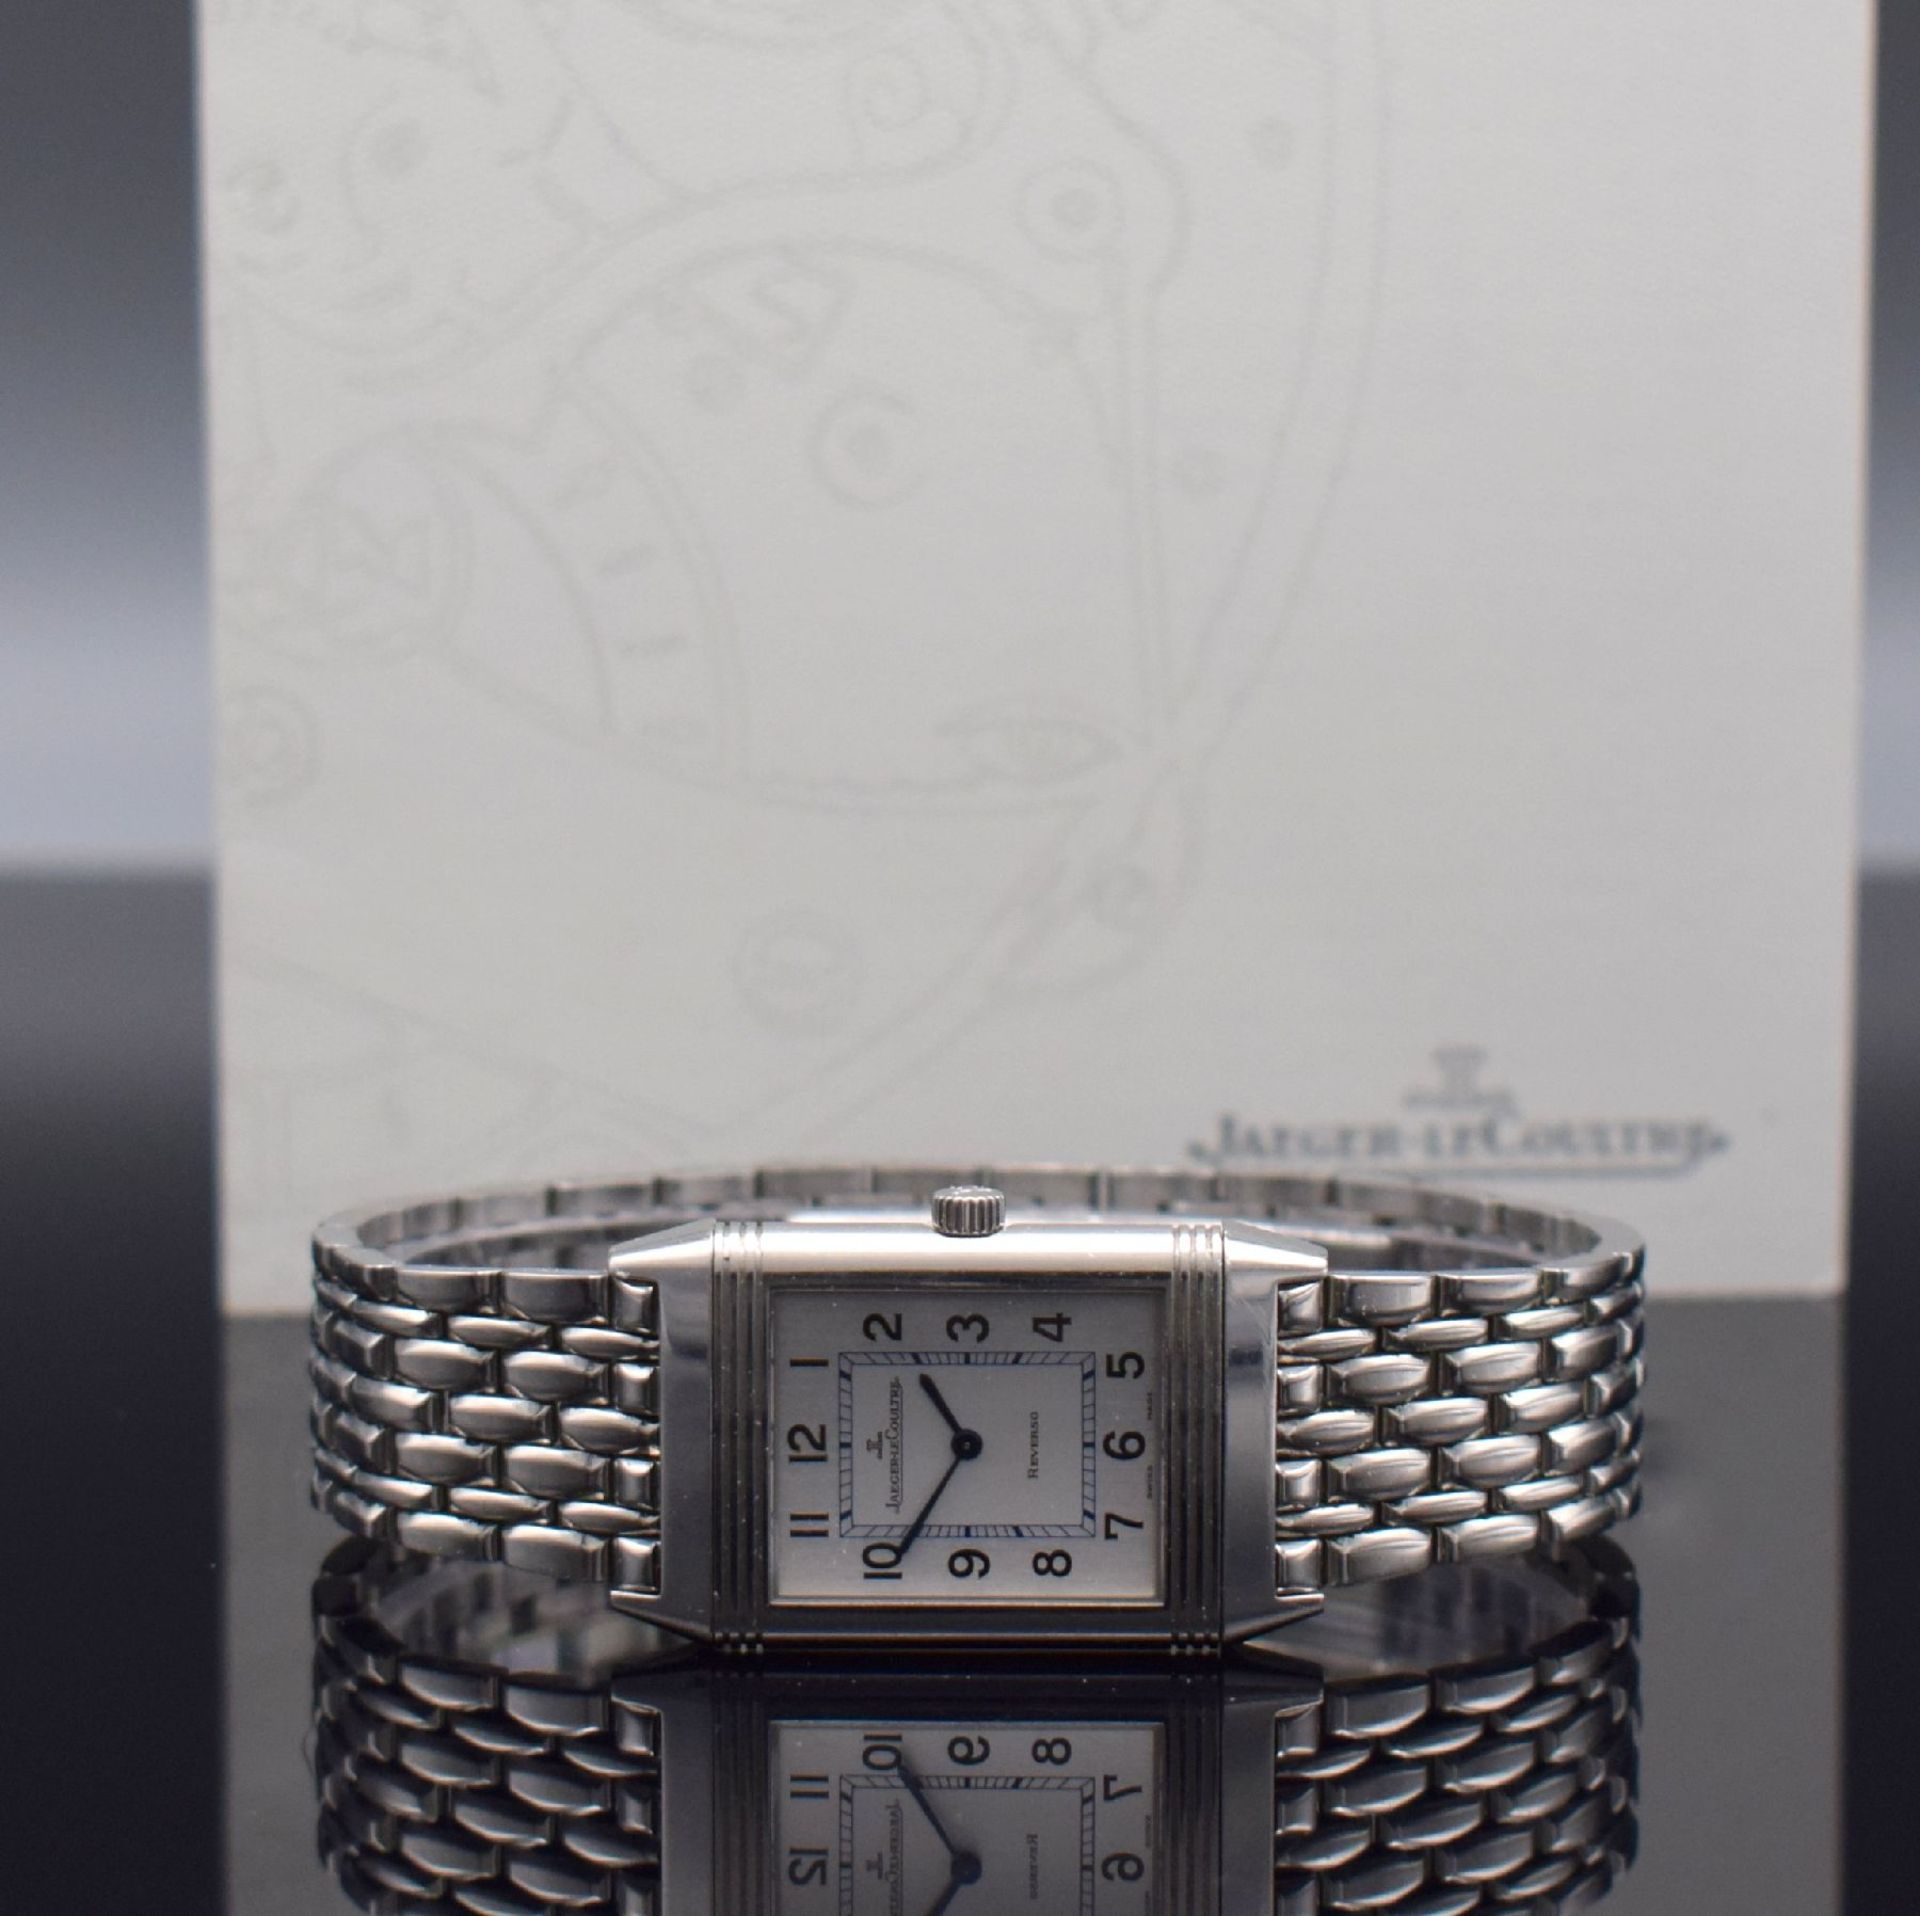 Jaeger-LeCoultre Reverso Classic Armbanduhr in Stahl, - Image 10 of 10